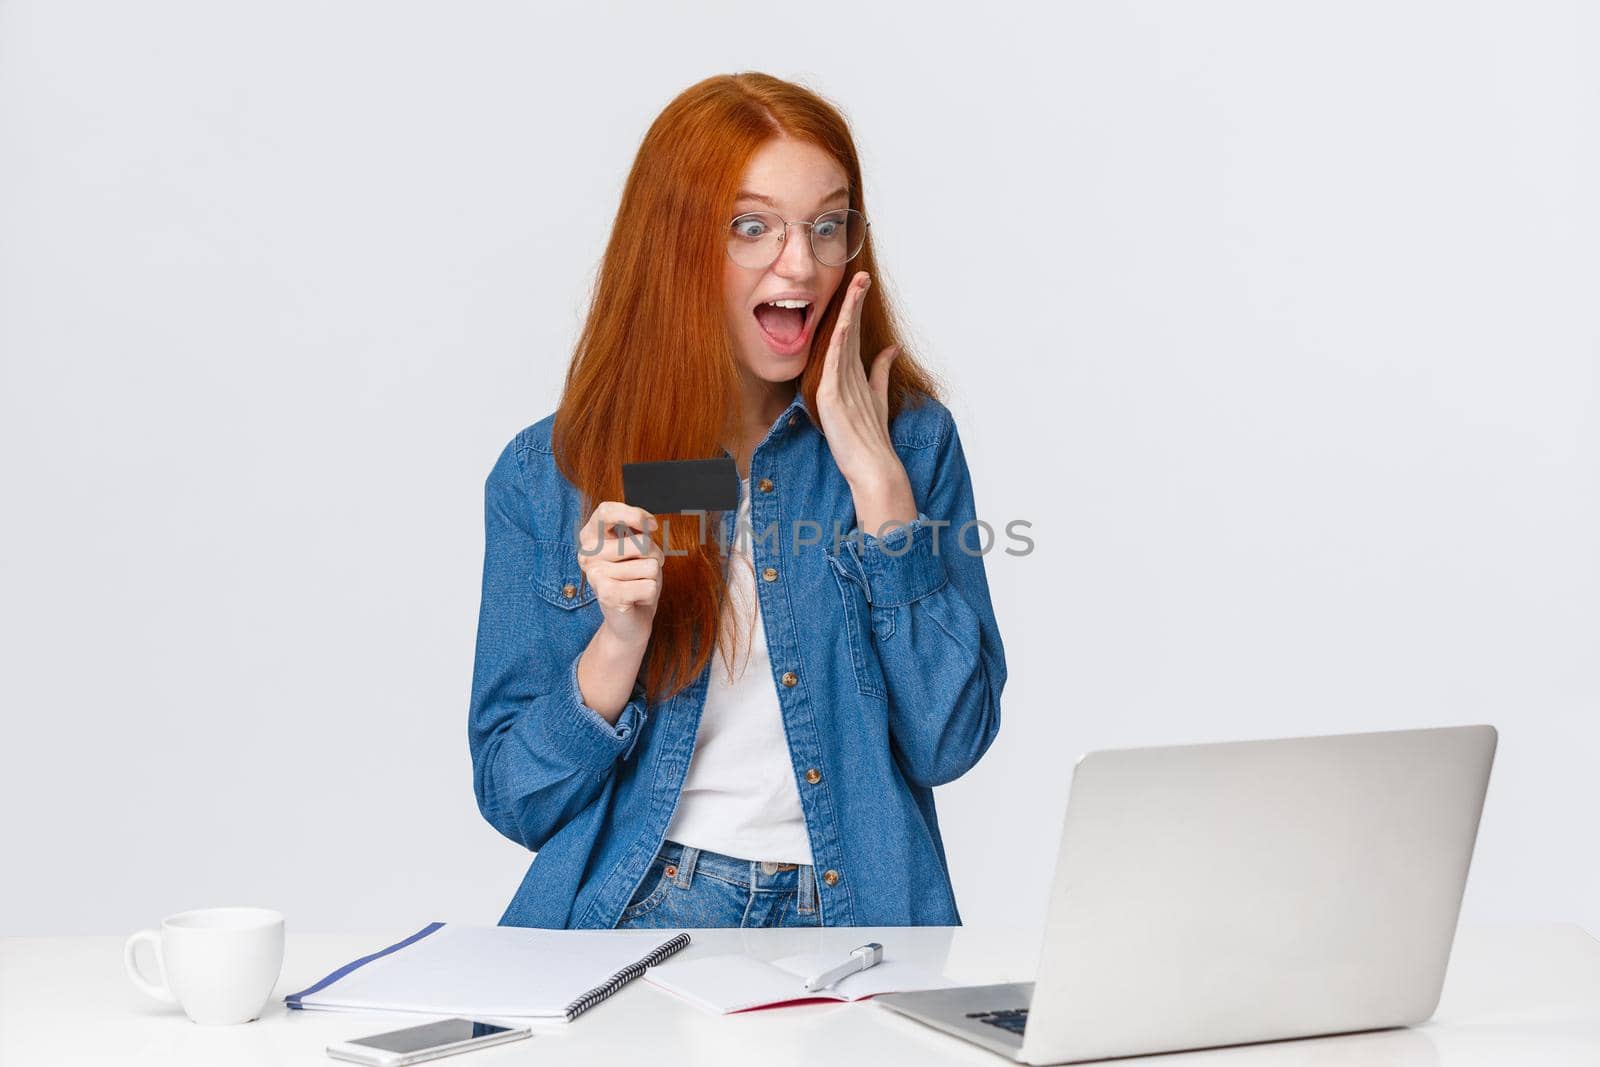 Excited and amused, happy redhead woman seeing something awesome on screen laptop, drop jaw gasping astonished, touch face, holding credit card, standing white background impressed.